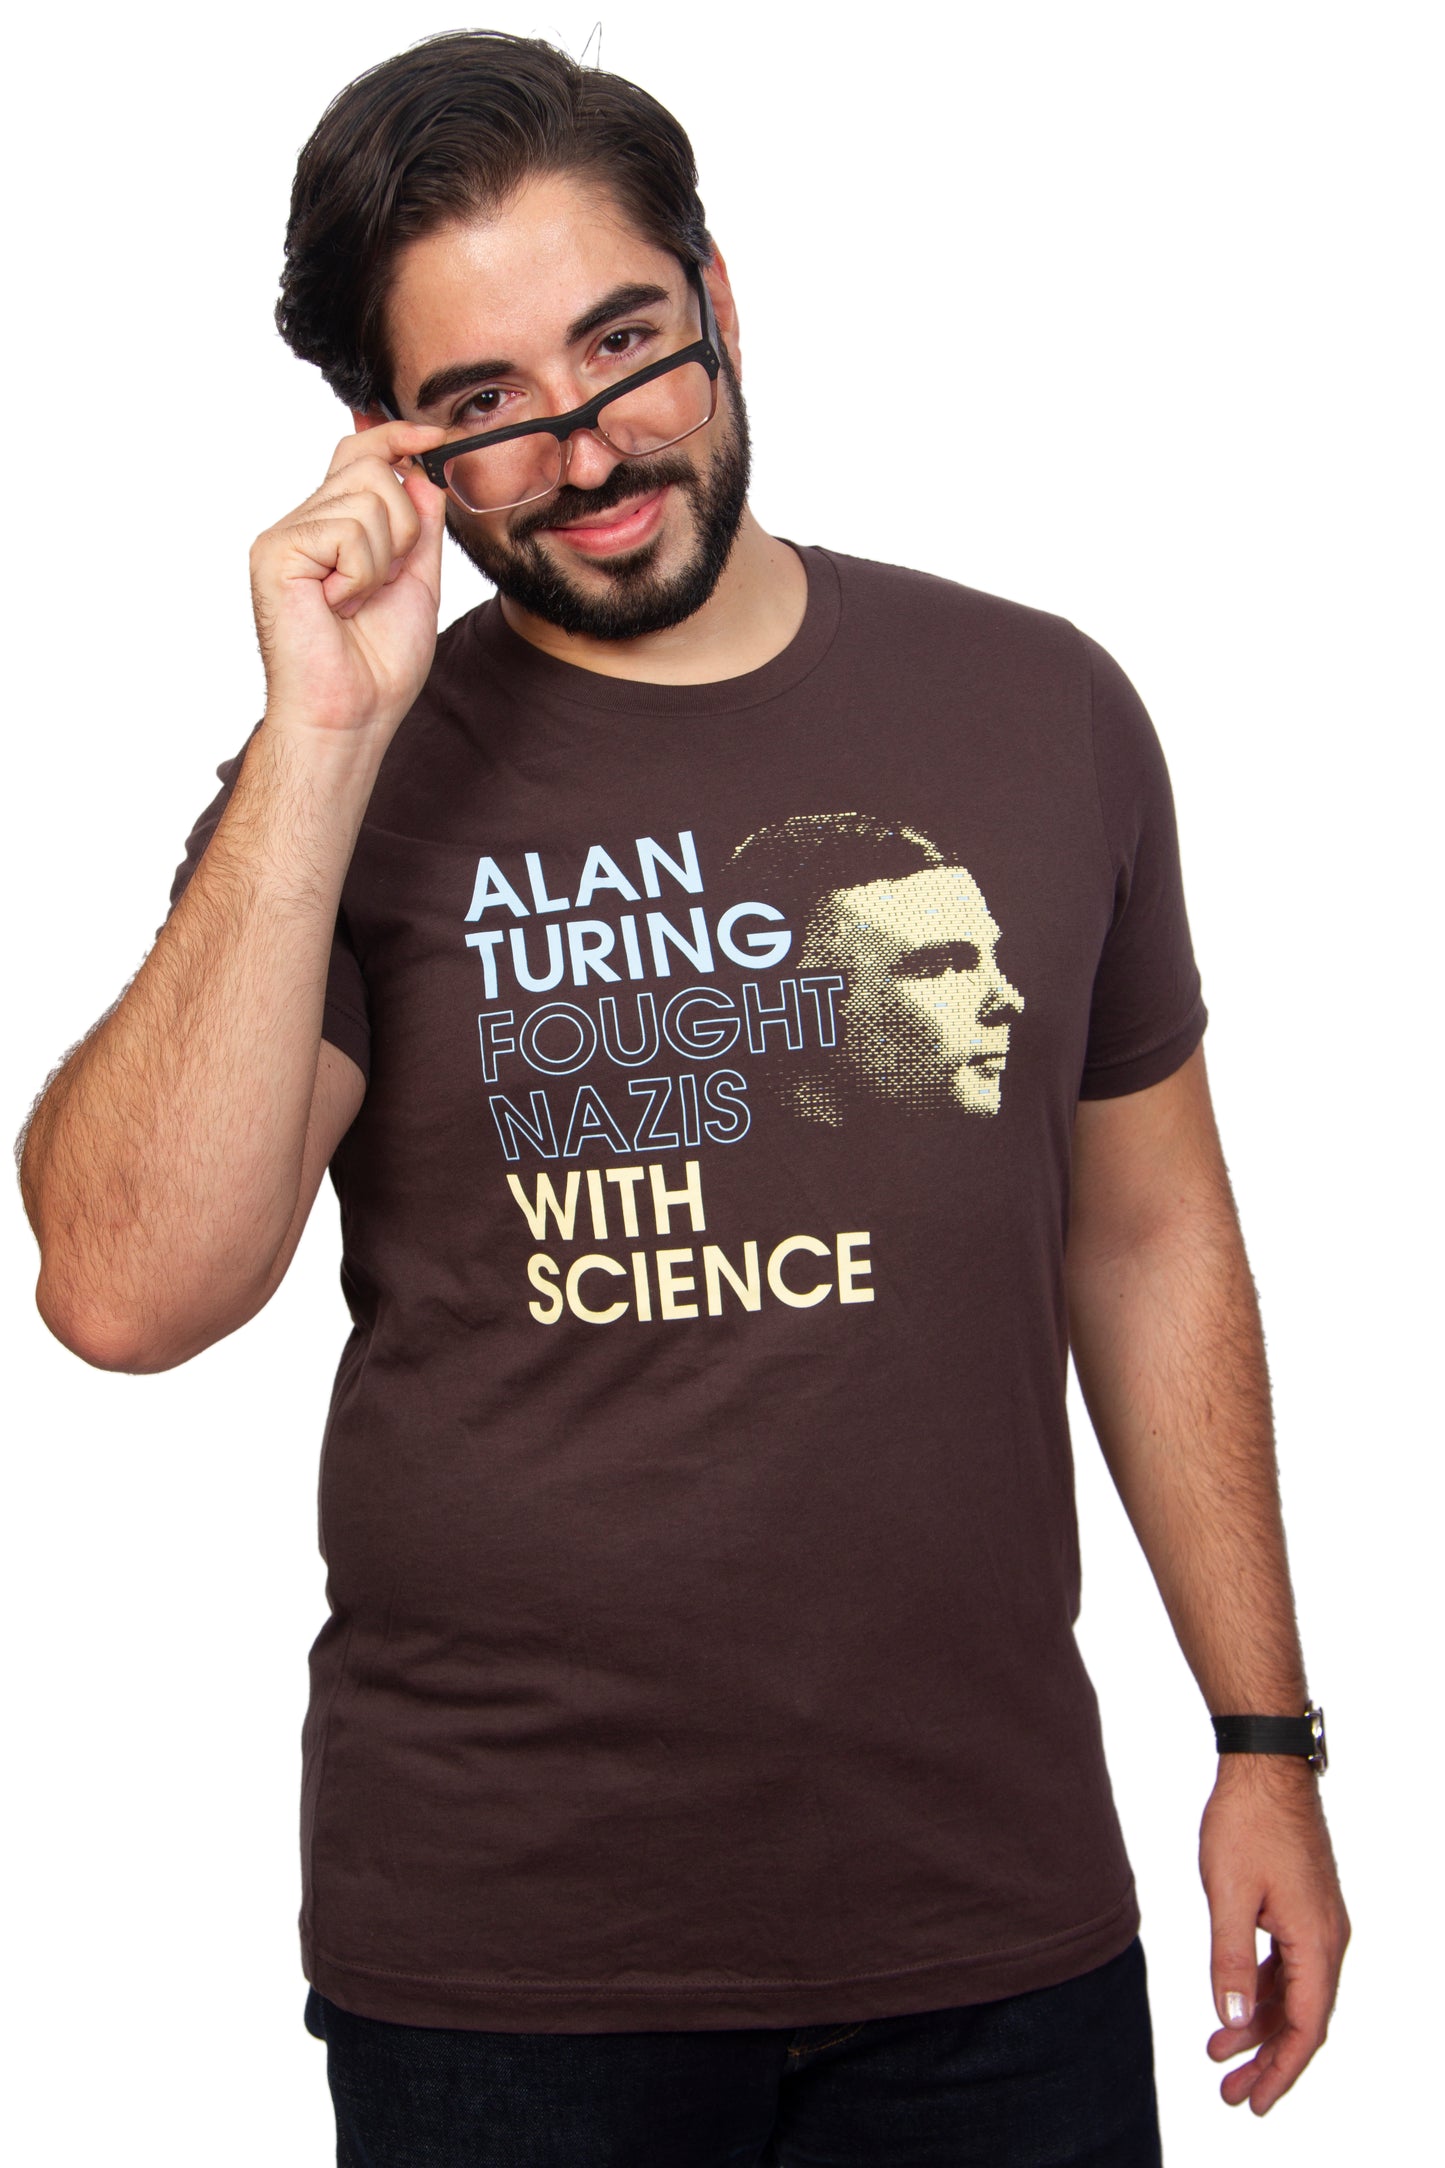 Alan Turing Fought Nazis With Science T-shirt